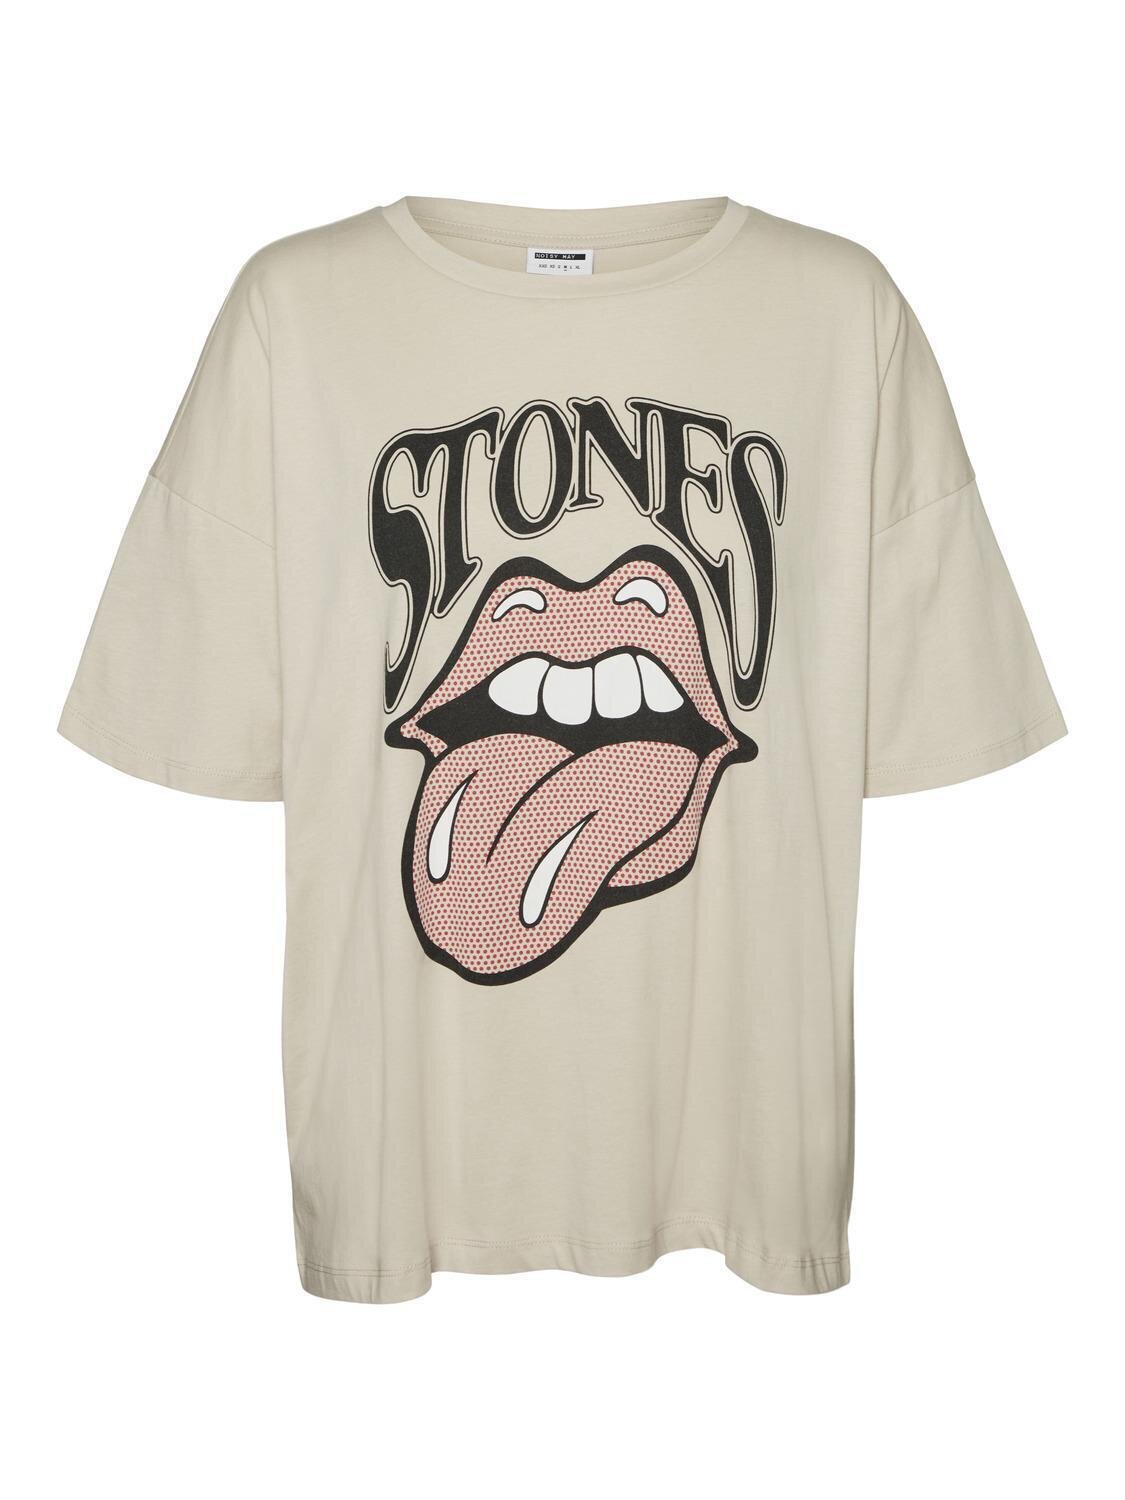 NMIDA S/S ROLLING STONE LICENSE T-SHIRT Chateau Gray-ROLLING STONES